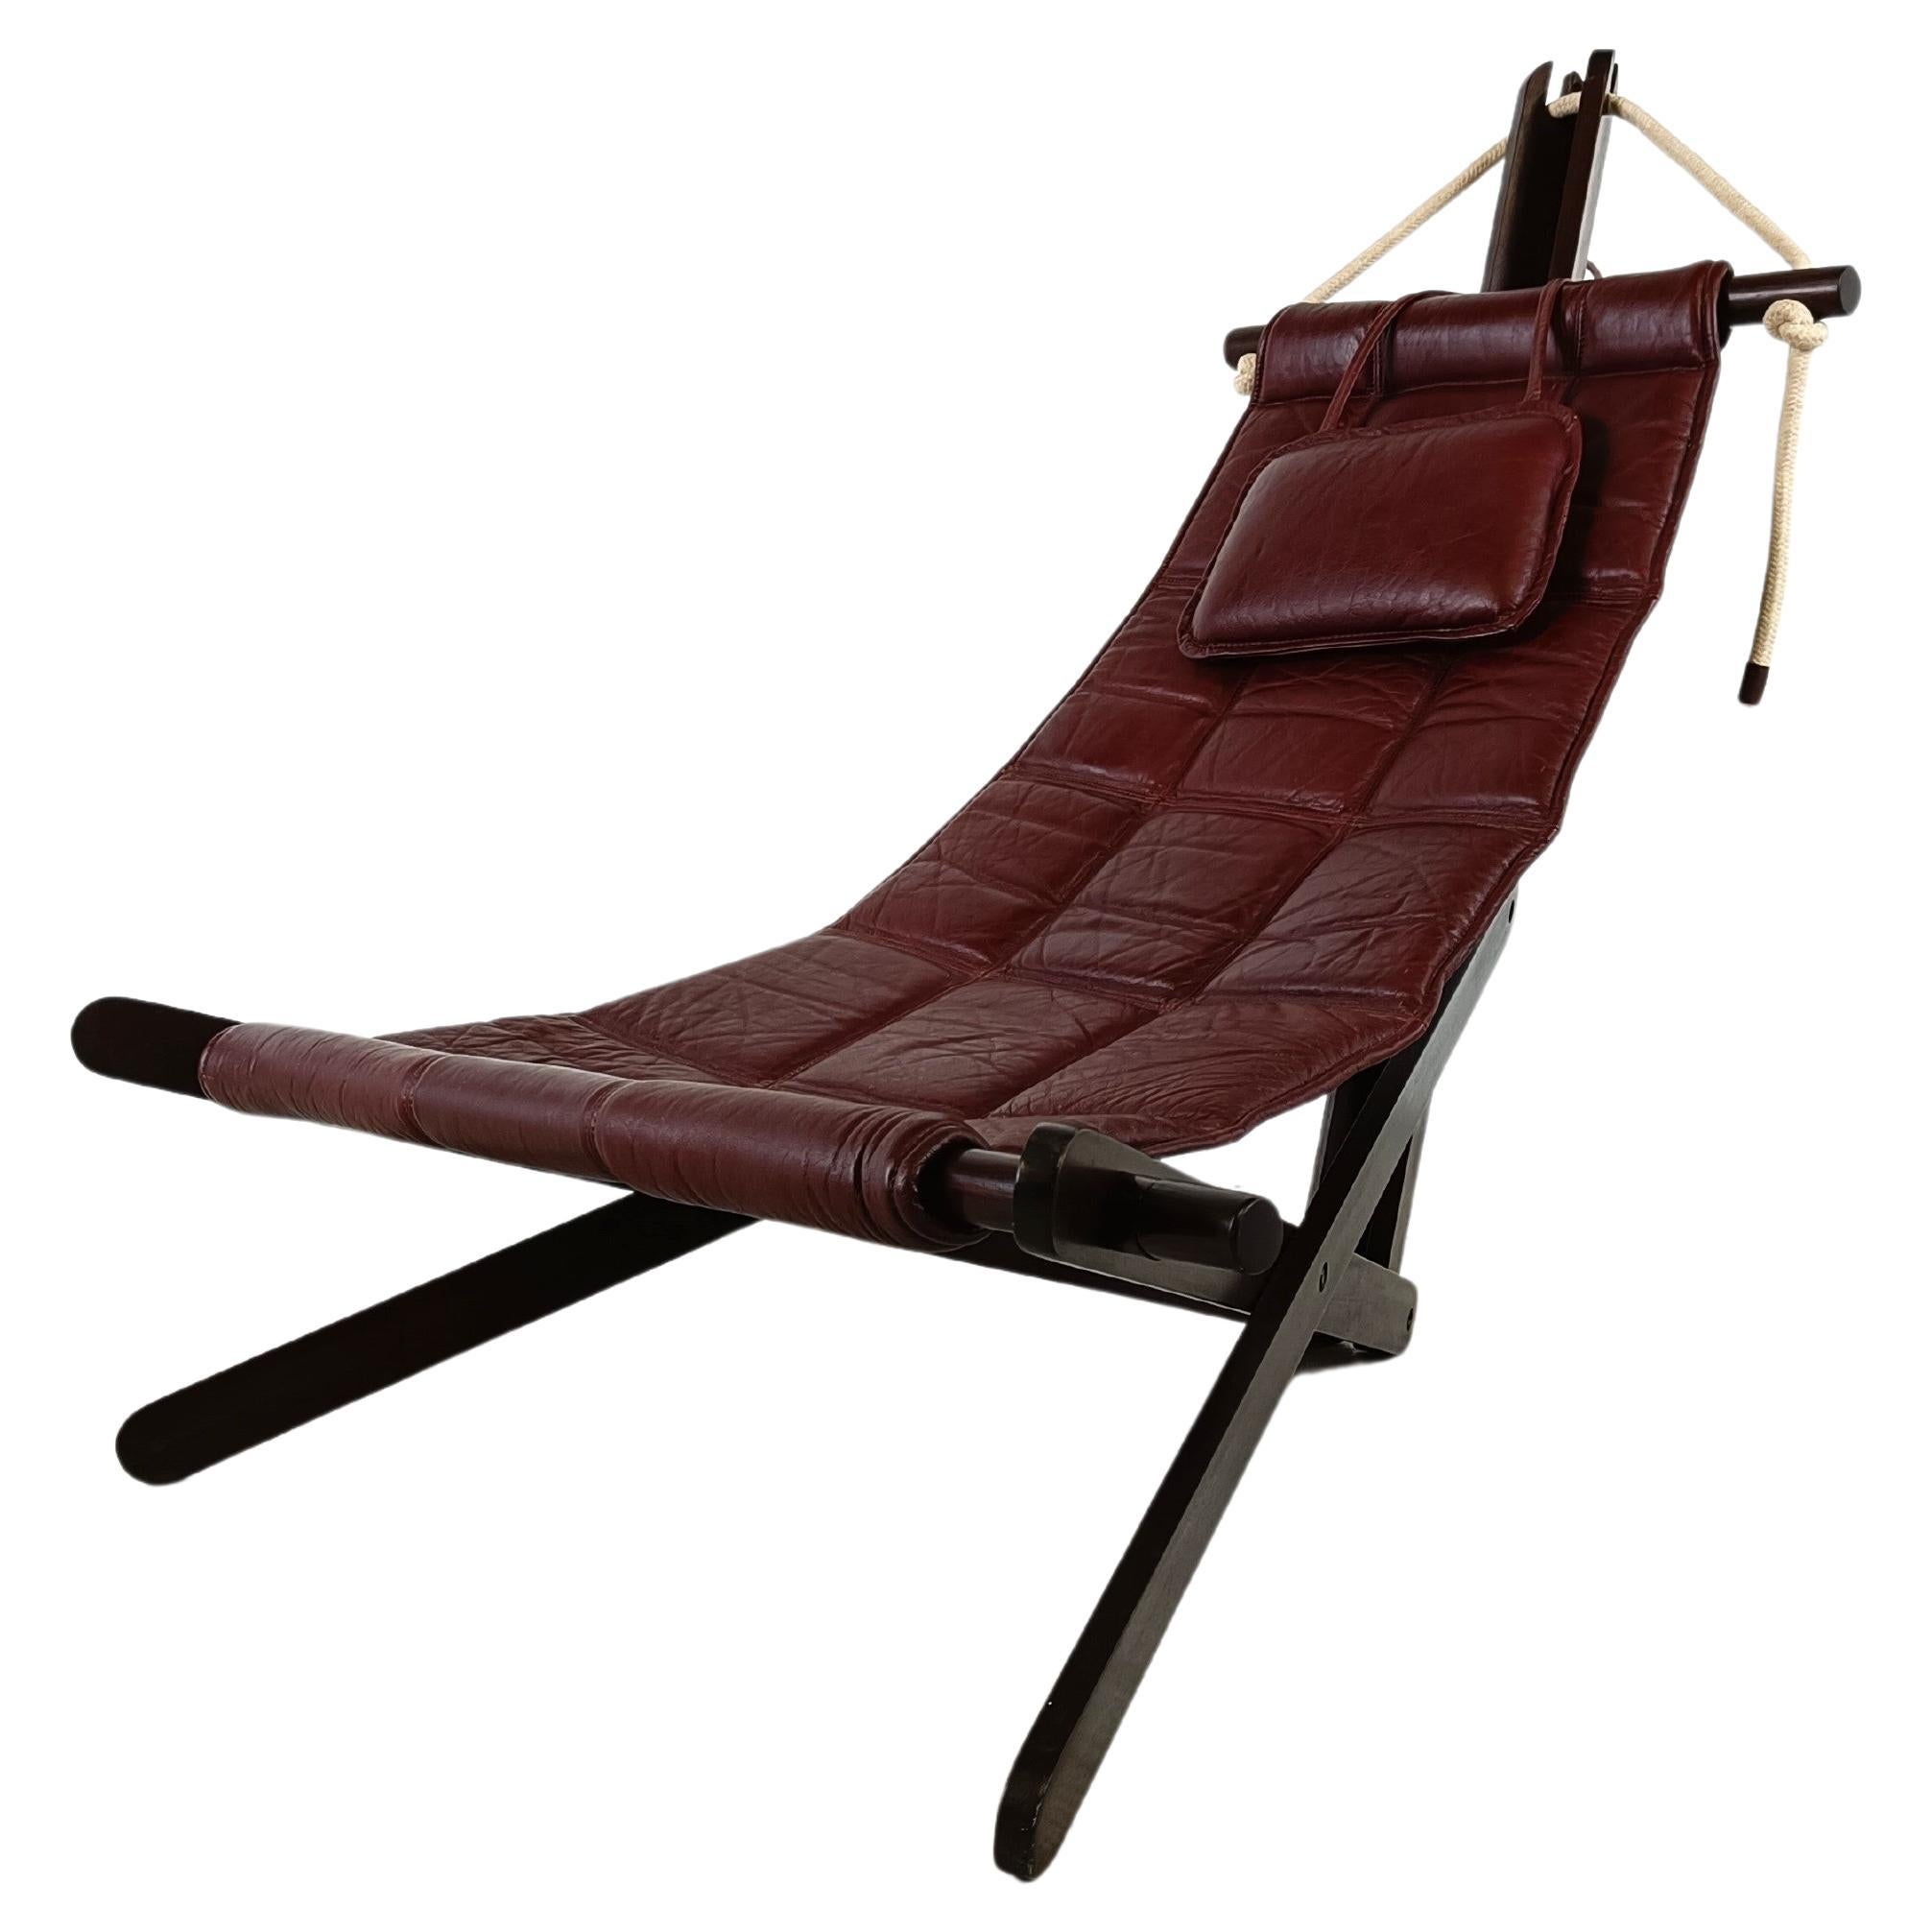 Sculptural Lounge Sling, Dominic Michaelis "Sail Chair" for Moveis Corazza  For Sale